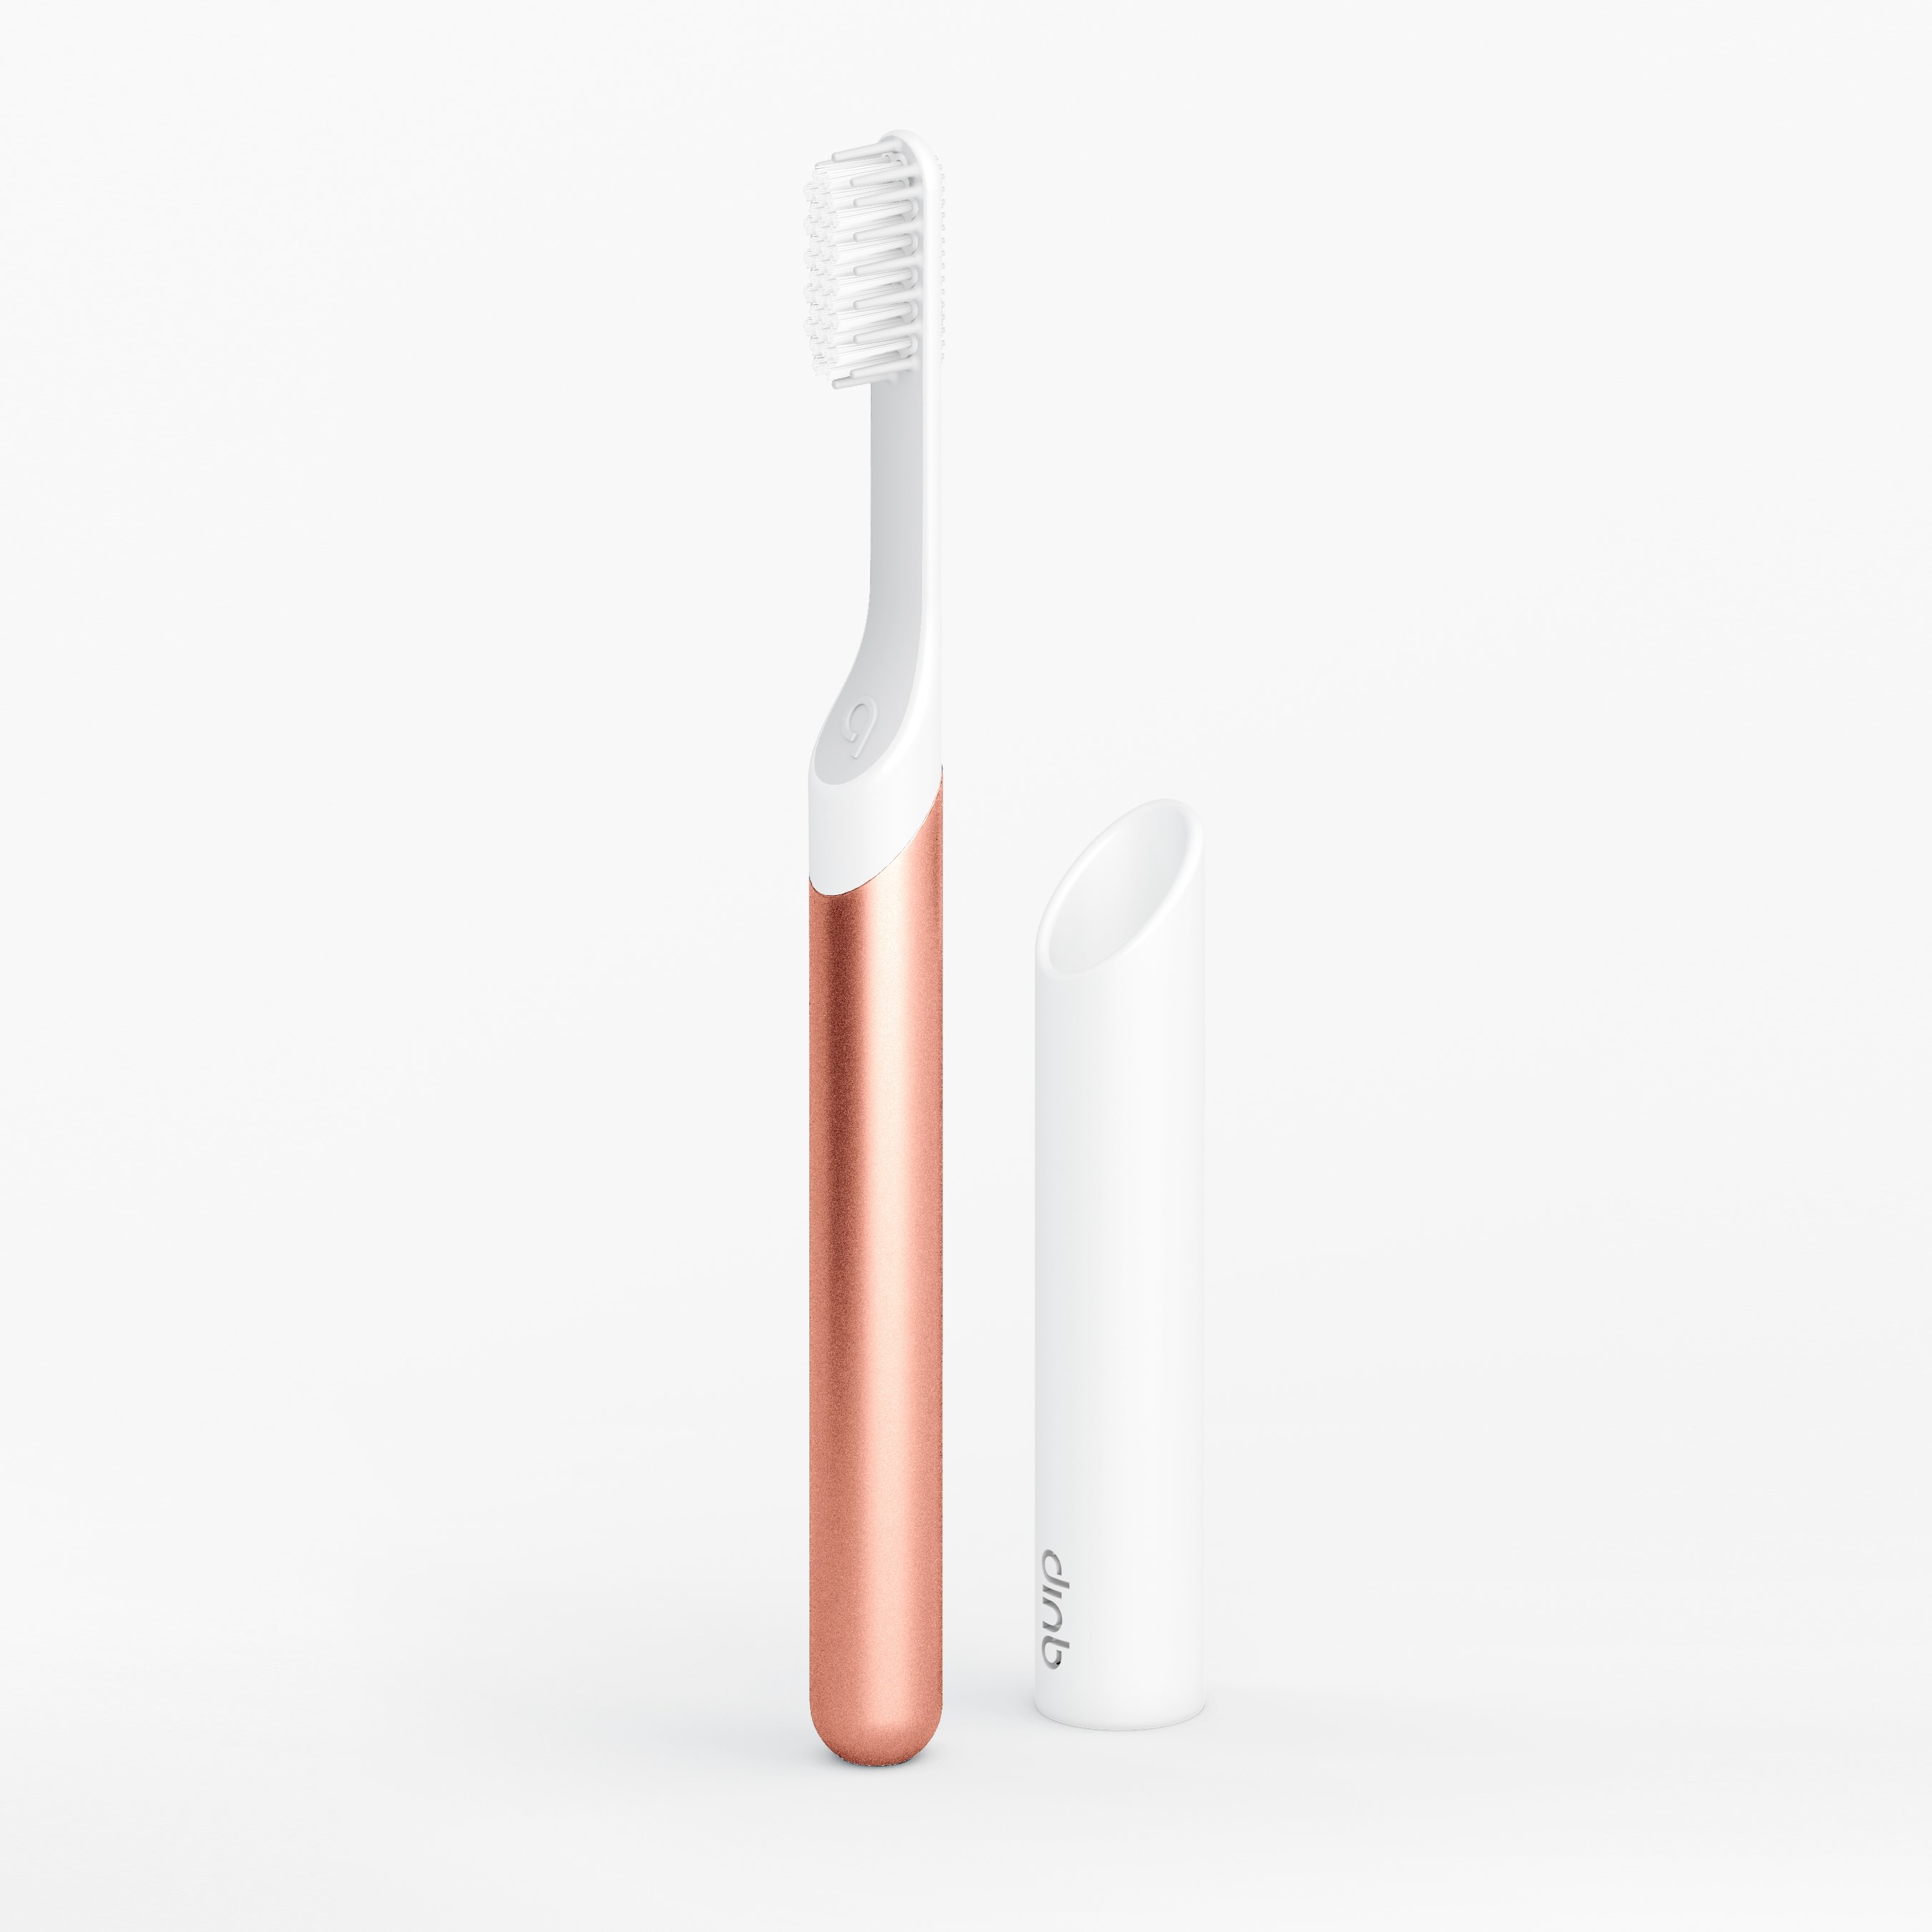 How To Change The Battery In A Quip Toothbrush